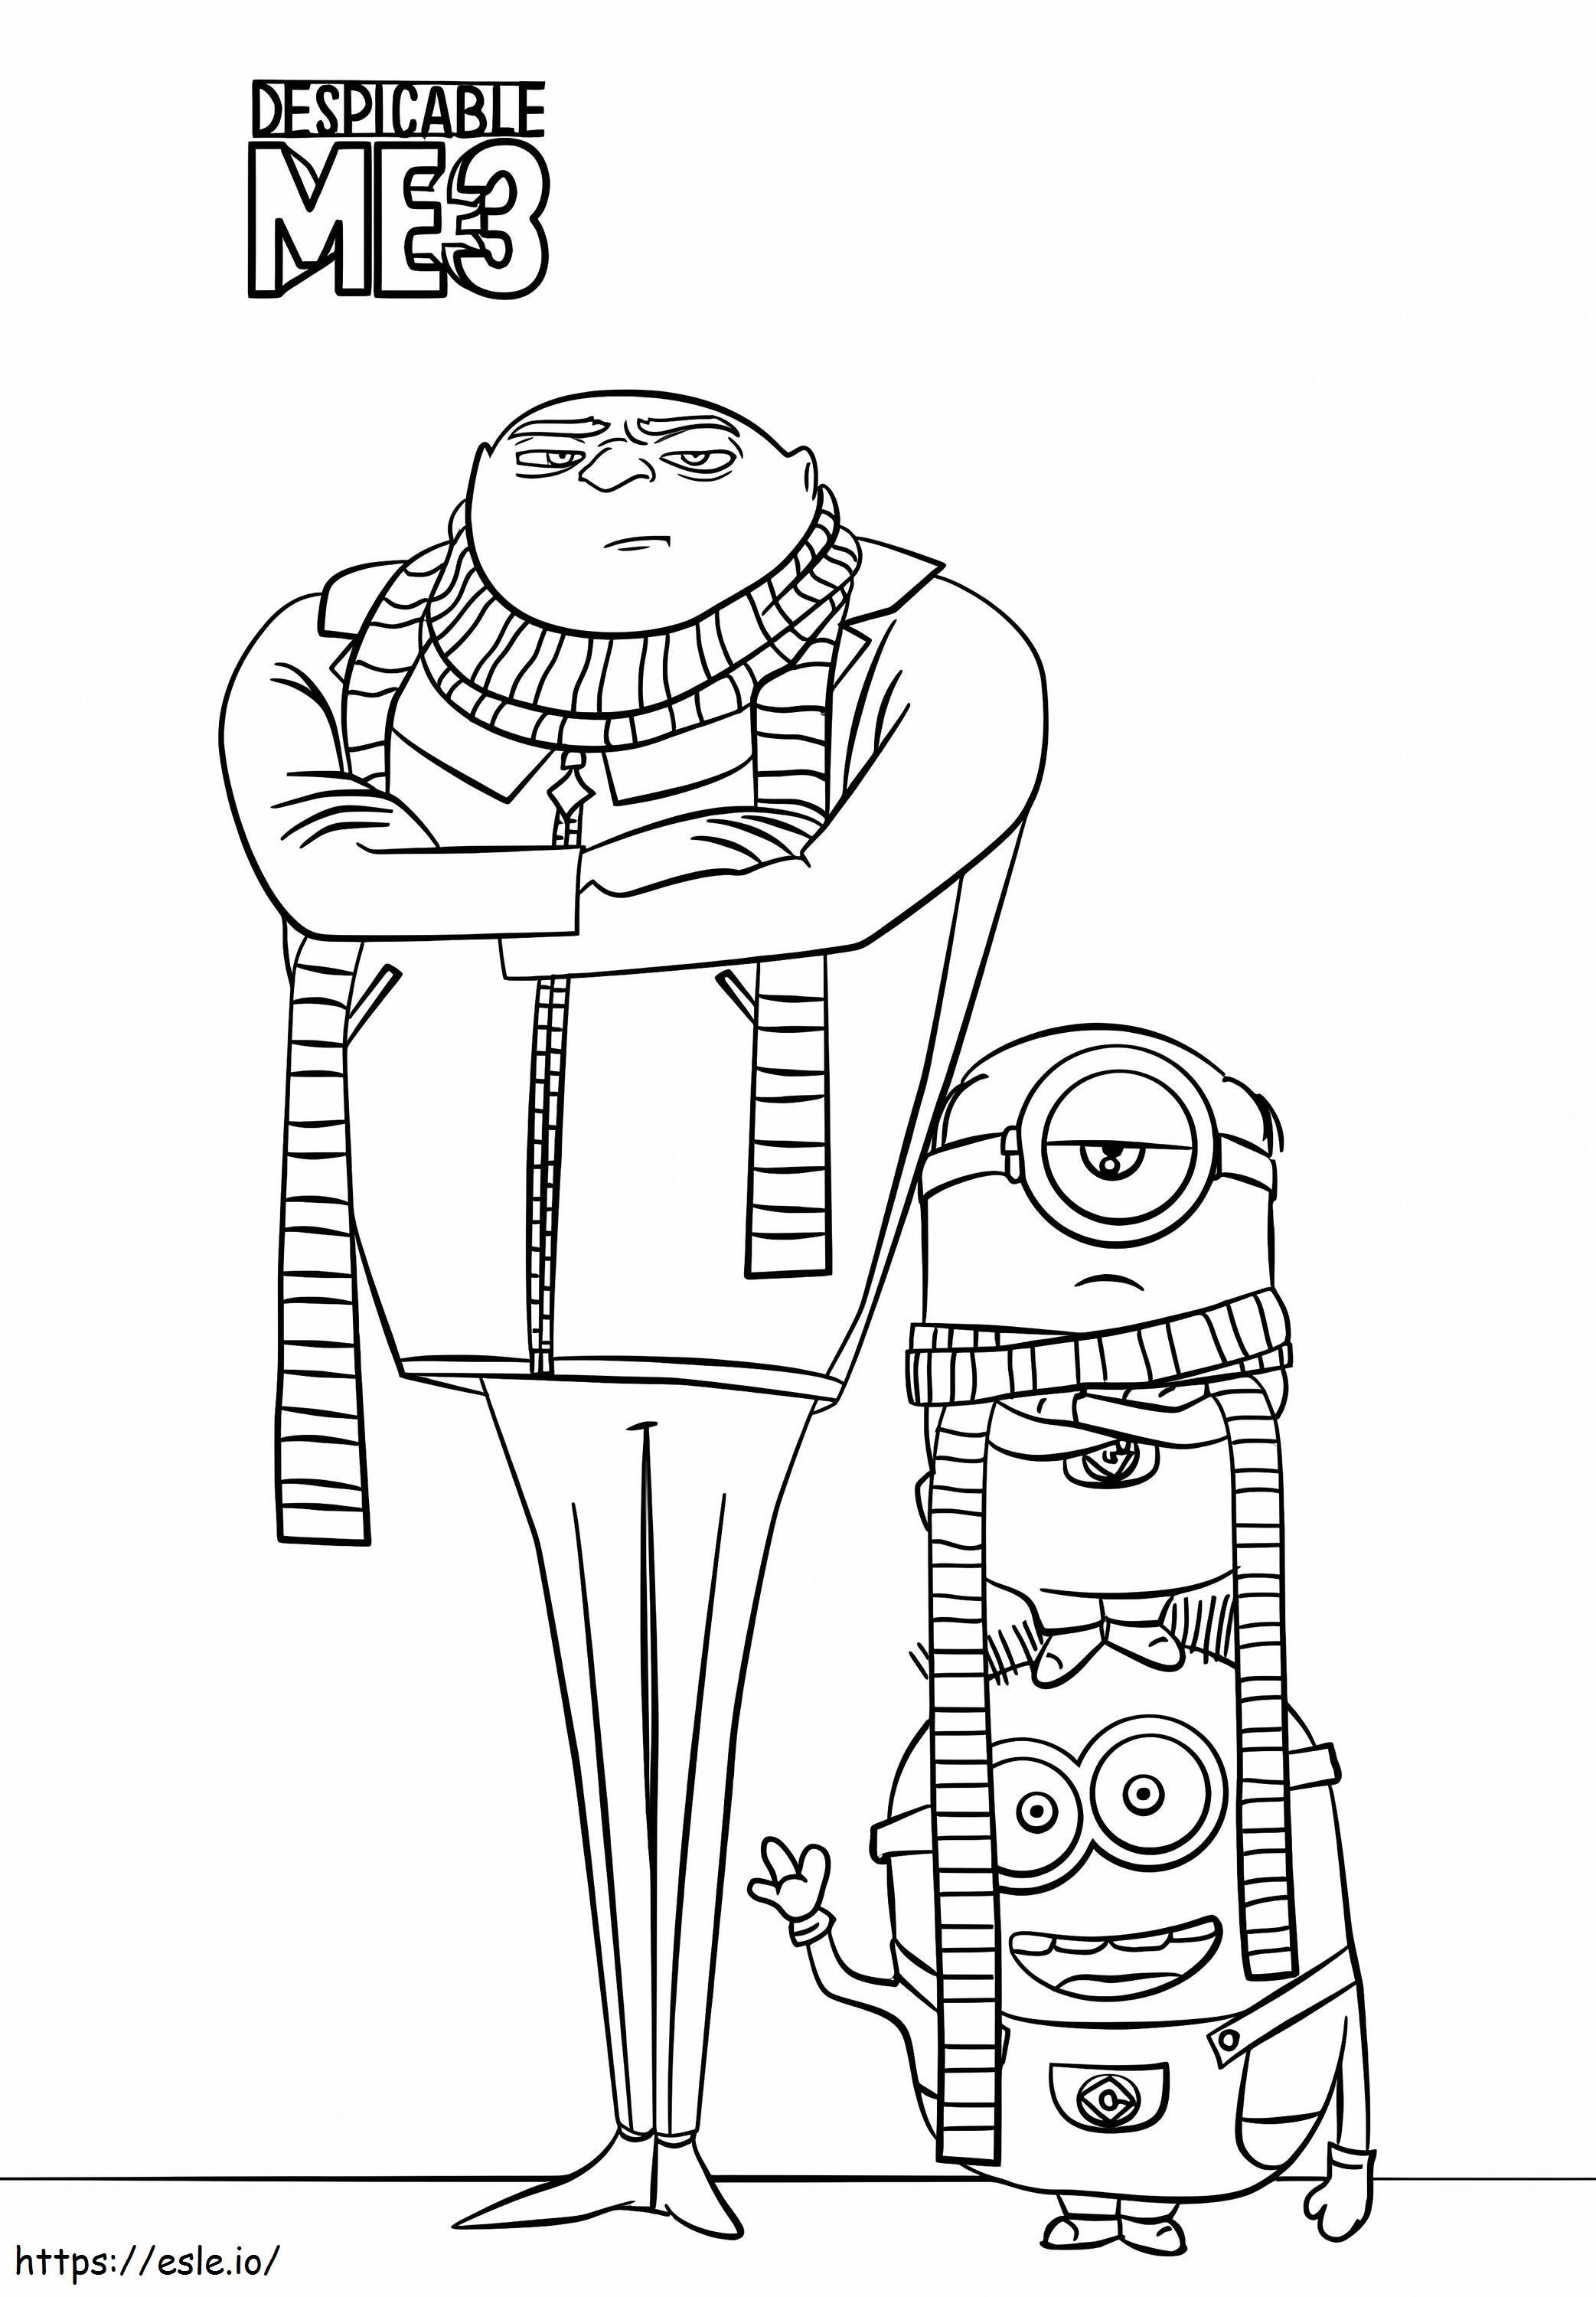 Gru And Minions From Despicable Me 3 coloring page